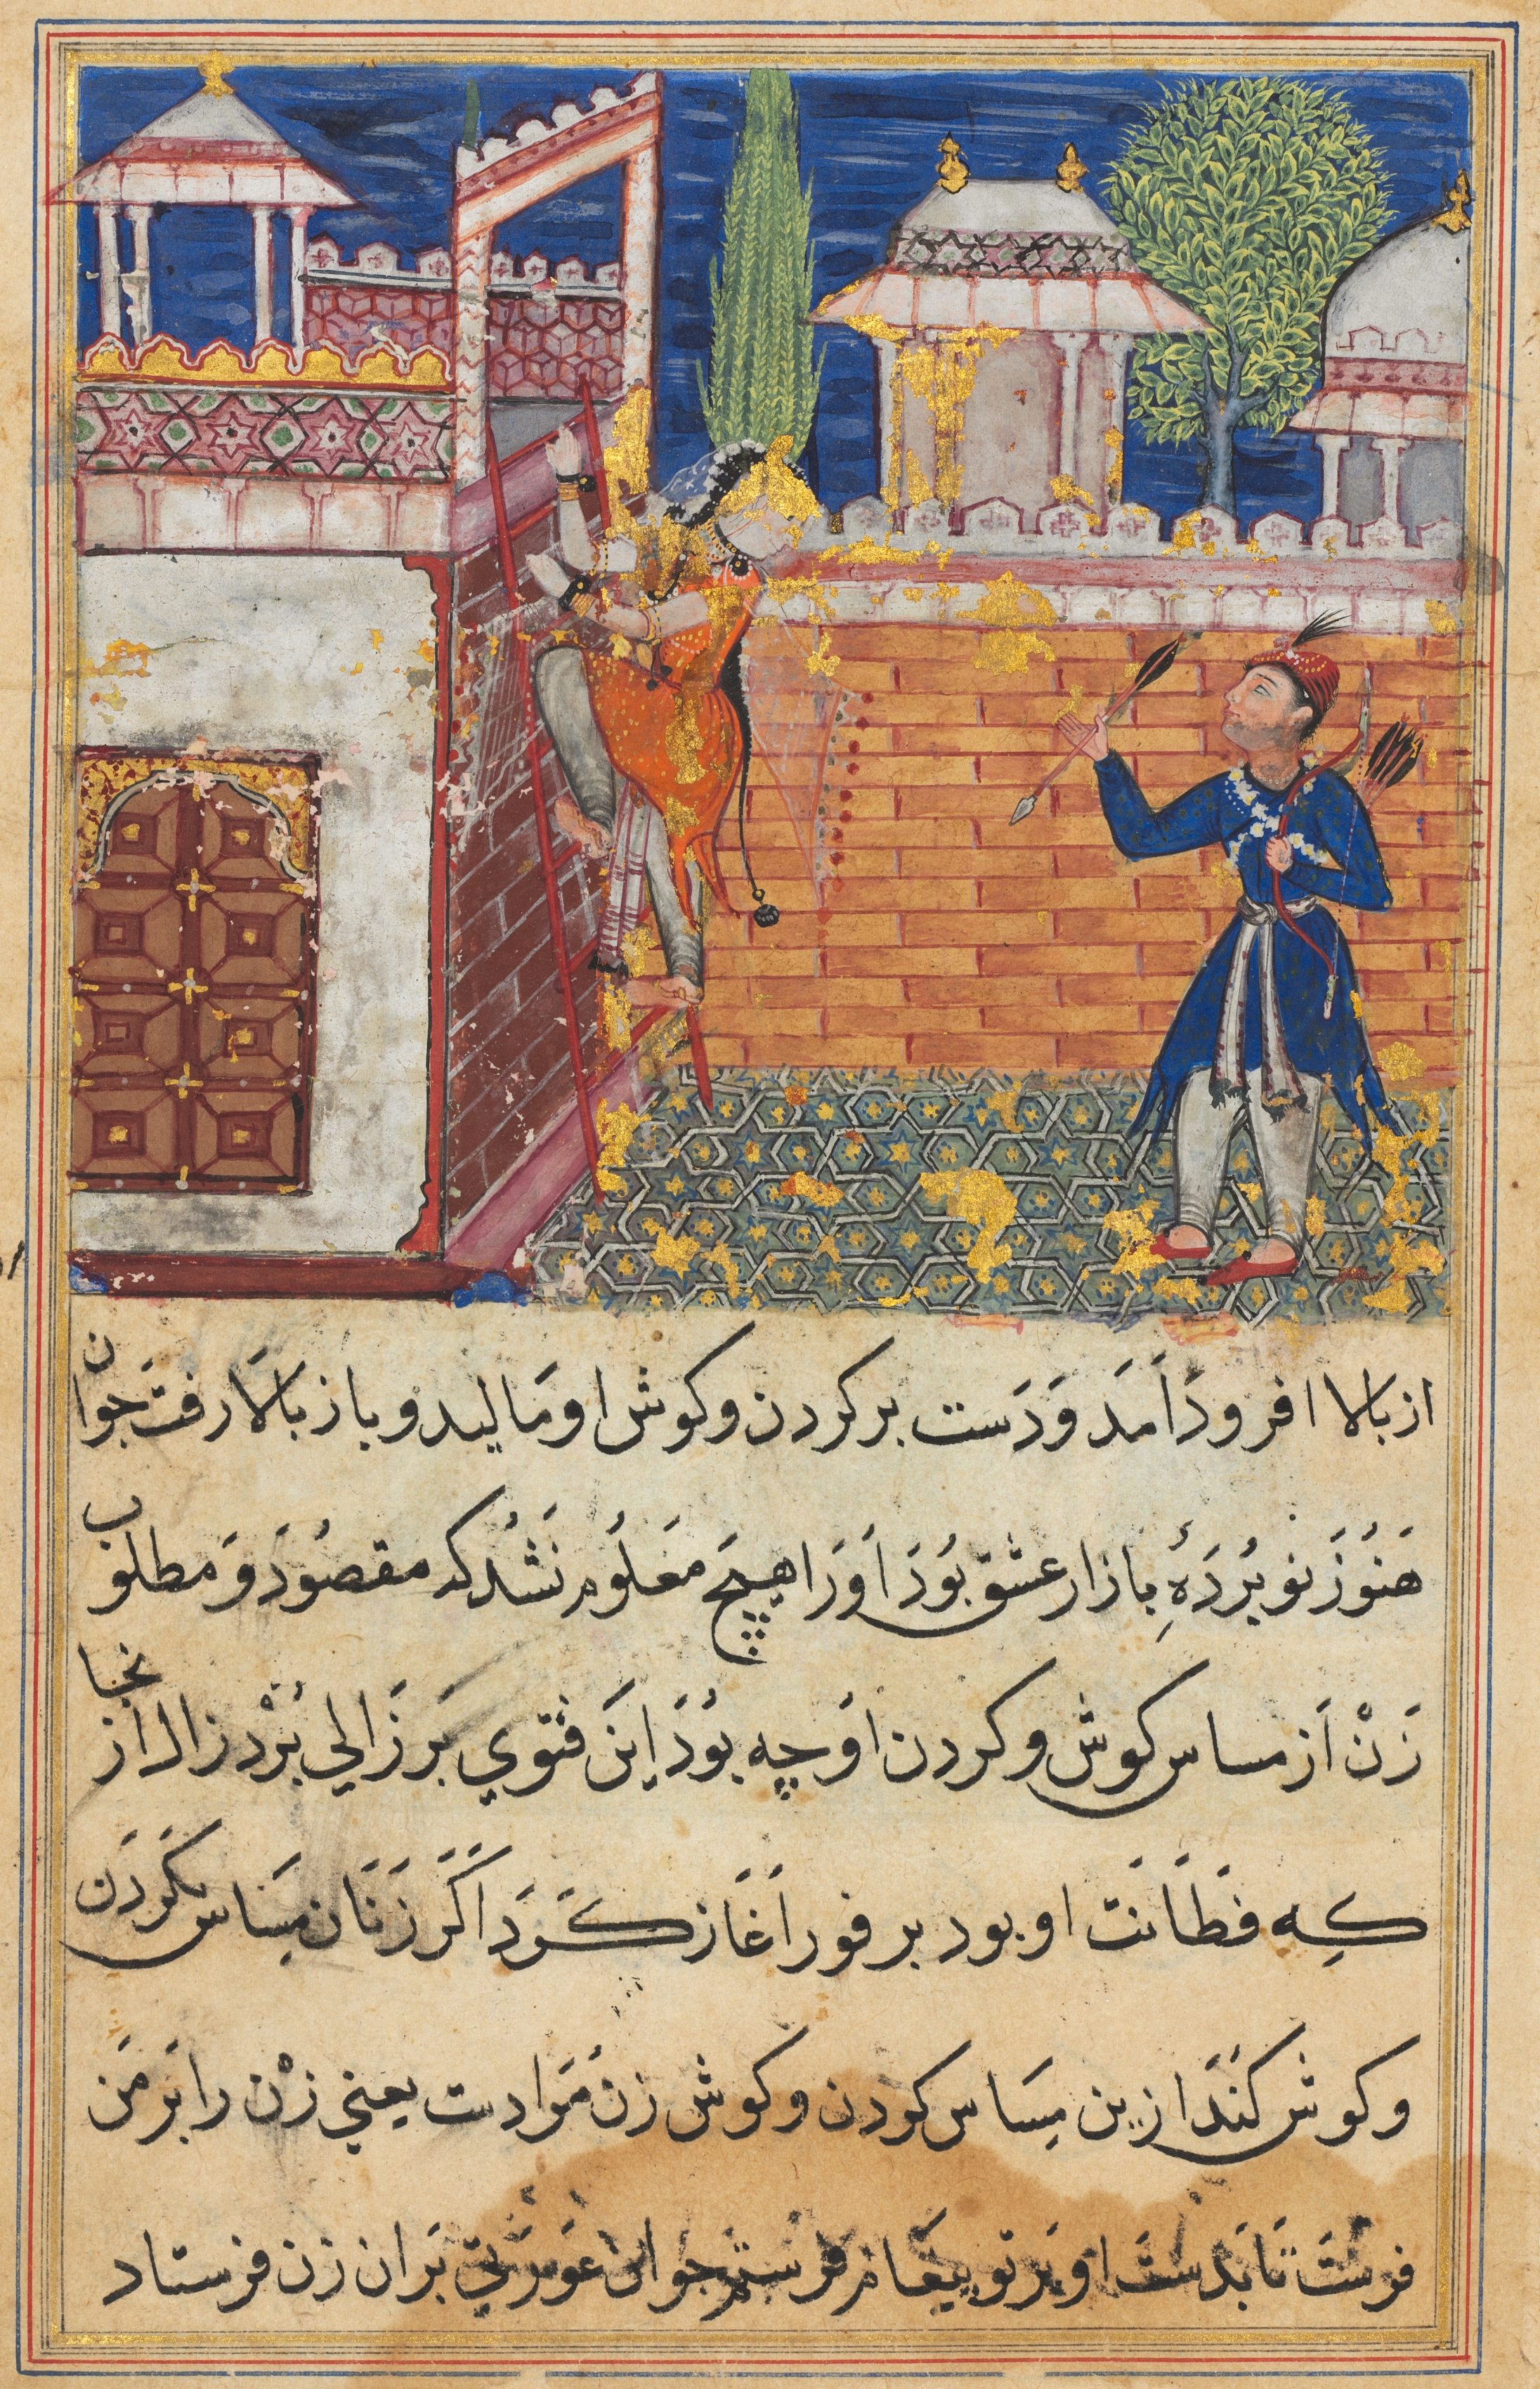 The deceitful wife returns to her terrace after caressing her lover, from a Tuti-nama (Tales of a Parrot): Eighth Night